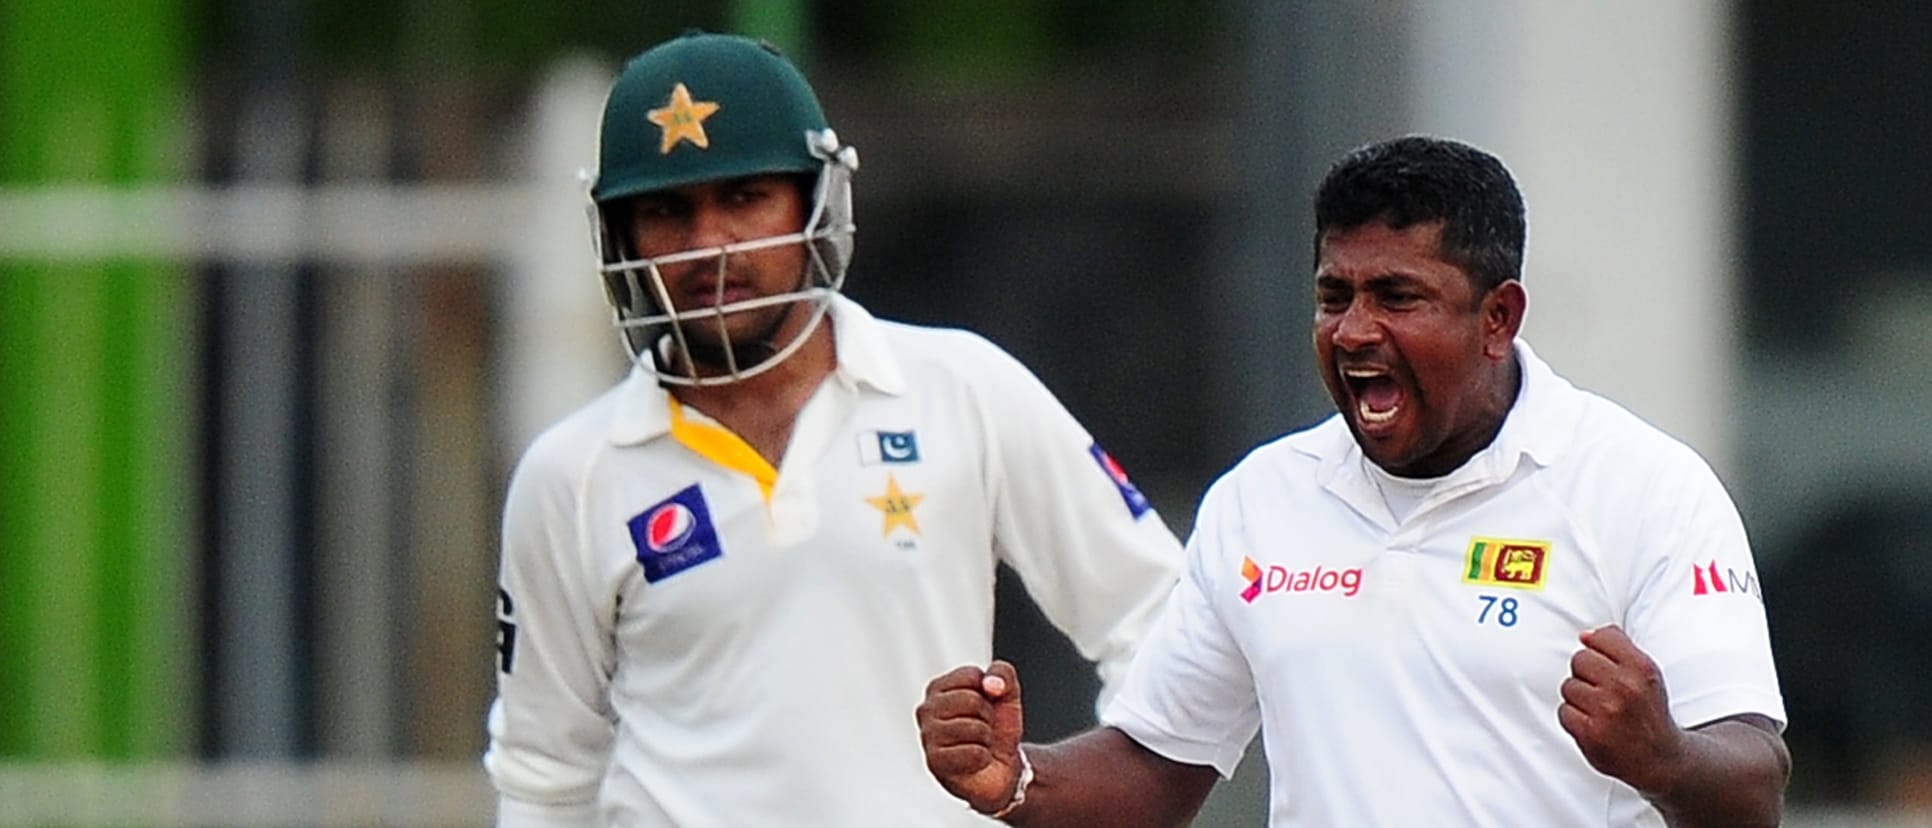 Even on a relatively fresh pitch, Herath was able to cause troubles aplenty